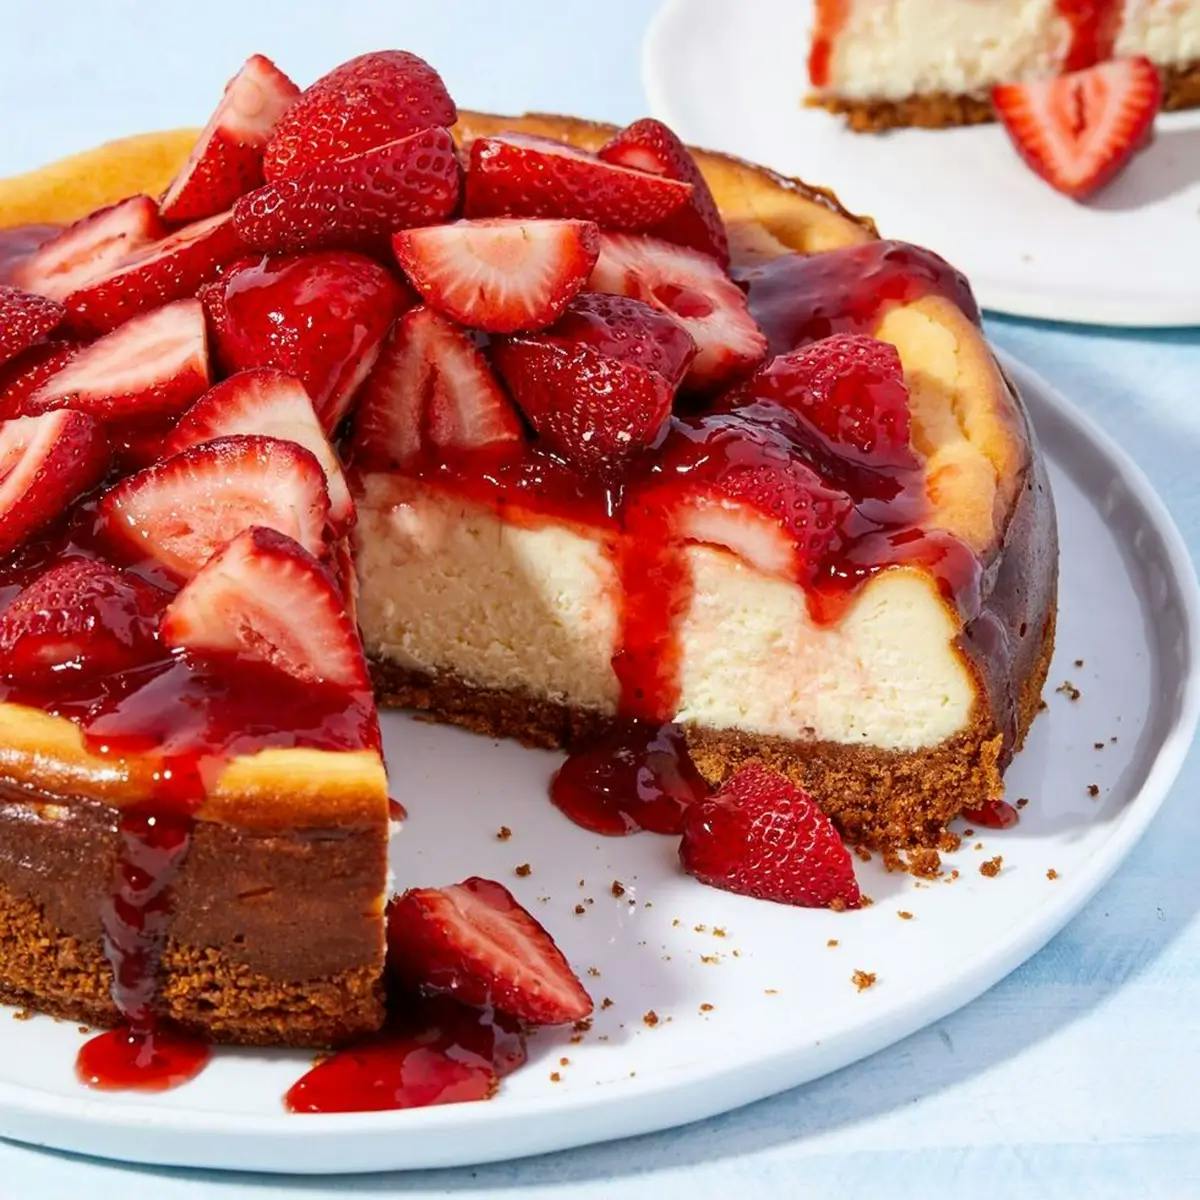 Strawberry cheesecake for Mother’s Day brunch, on a plate with a slice missing.